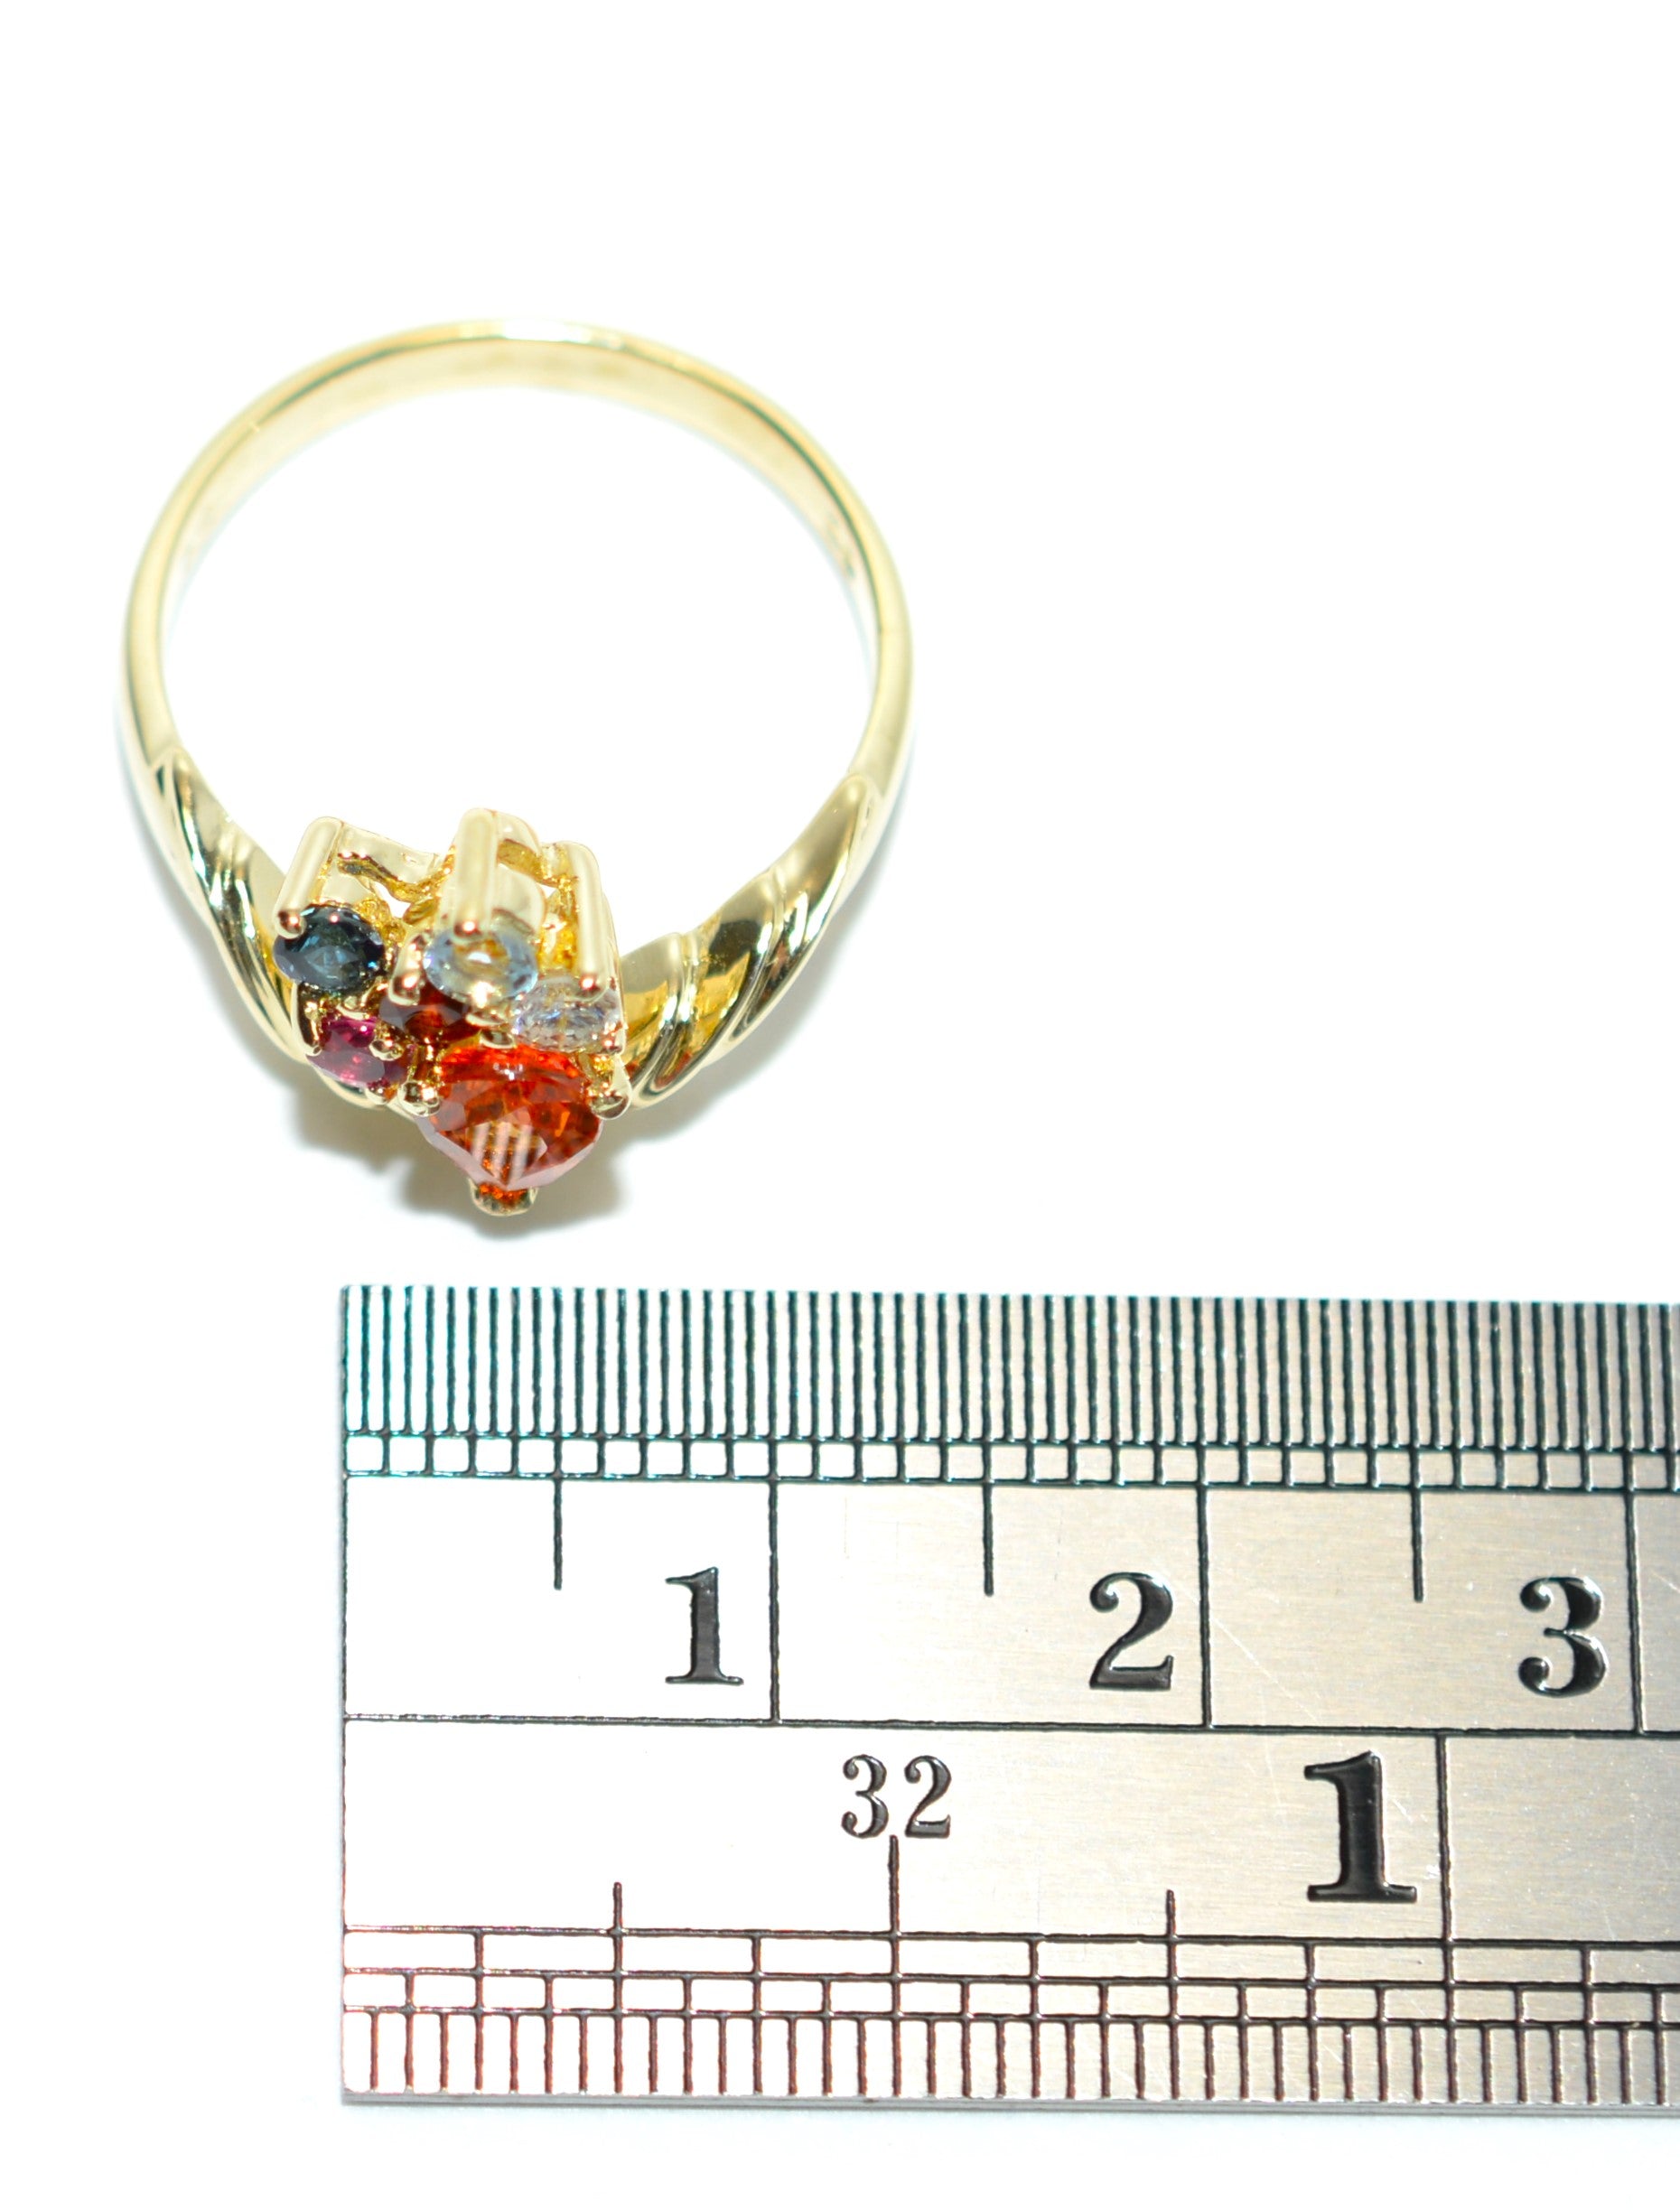 Natural Padparadscha Sapphire & Diamond Ring 10K Solid Gold .98tcw Multistone Ring Birthstone Estate Vintage Jewellery Colorful Gemstone Ring